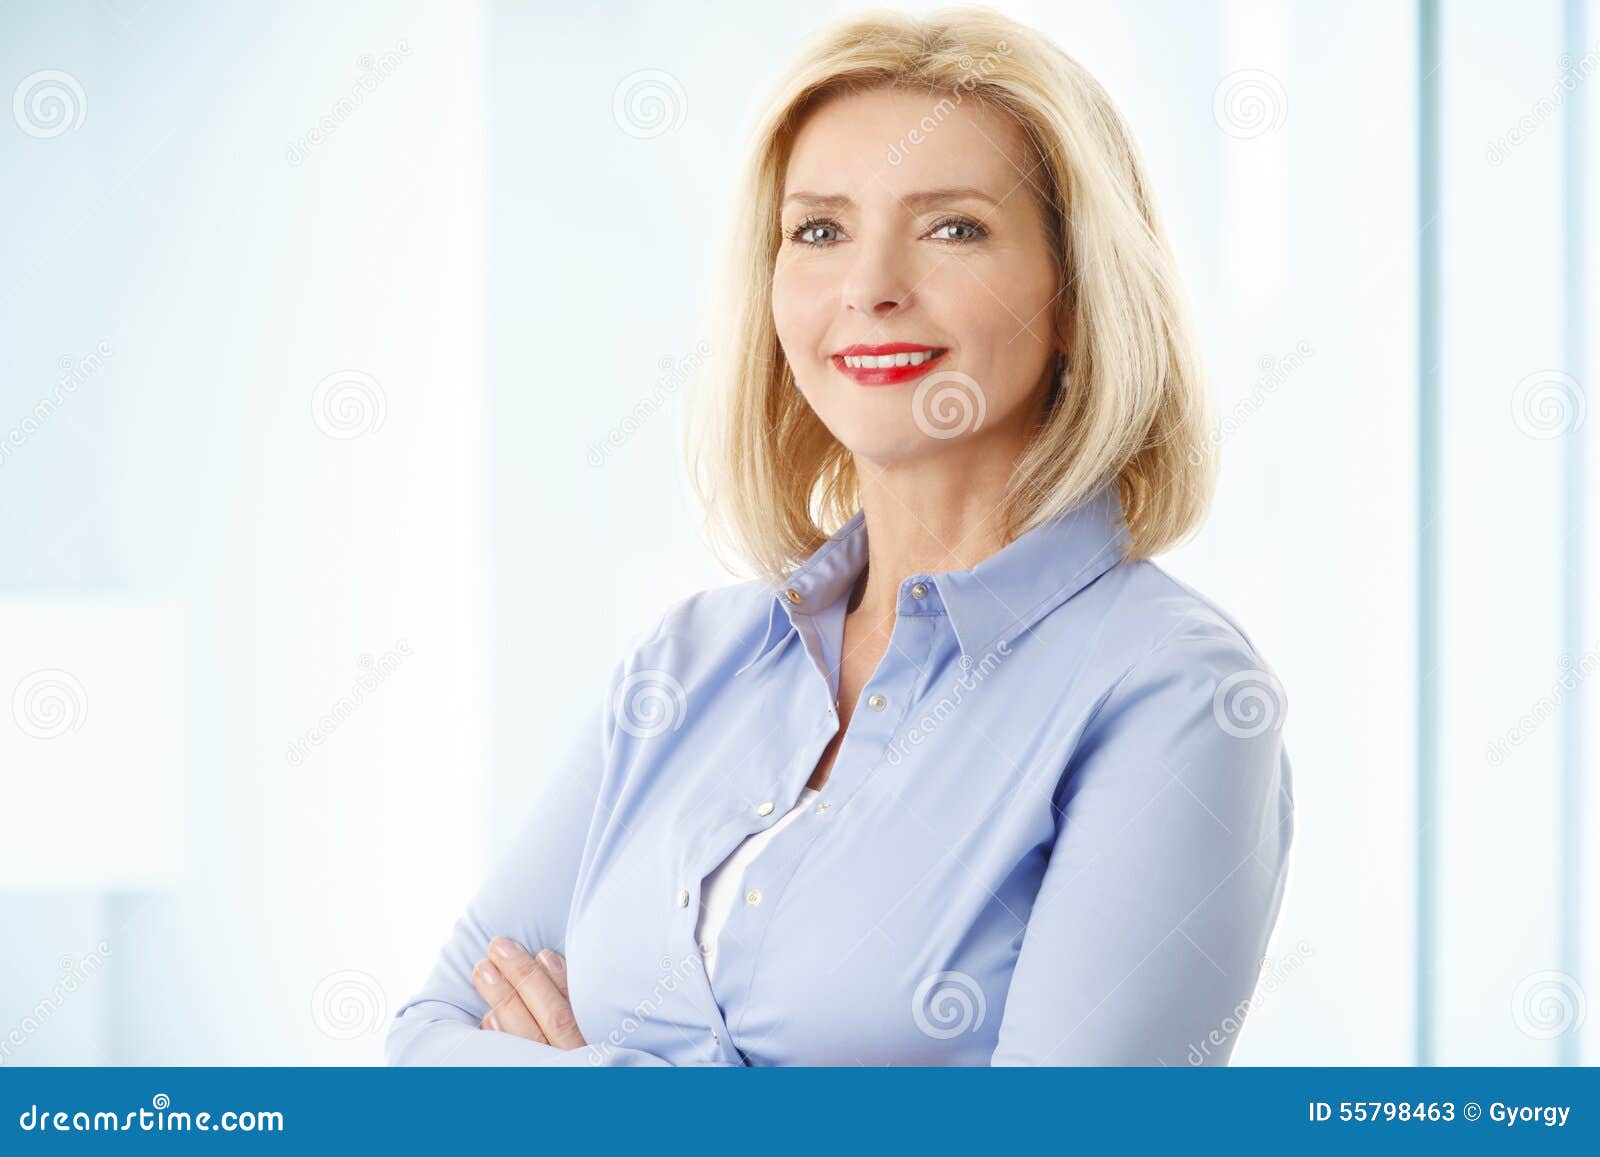 Middle-aged woman with crossed arms, middle age cute woman posing